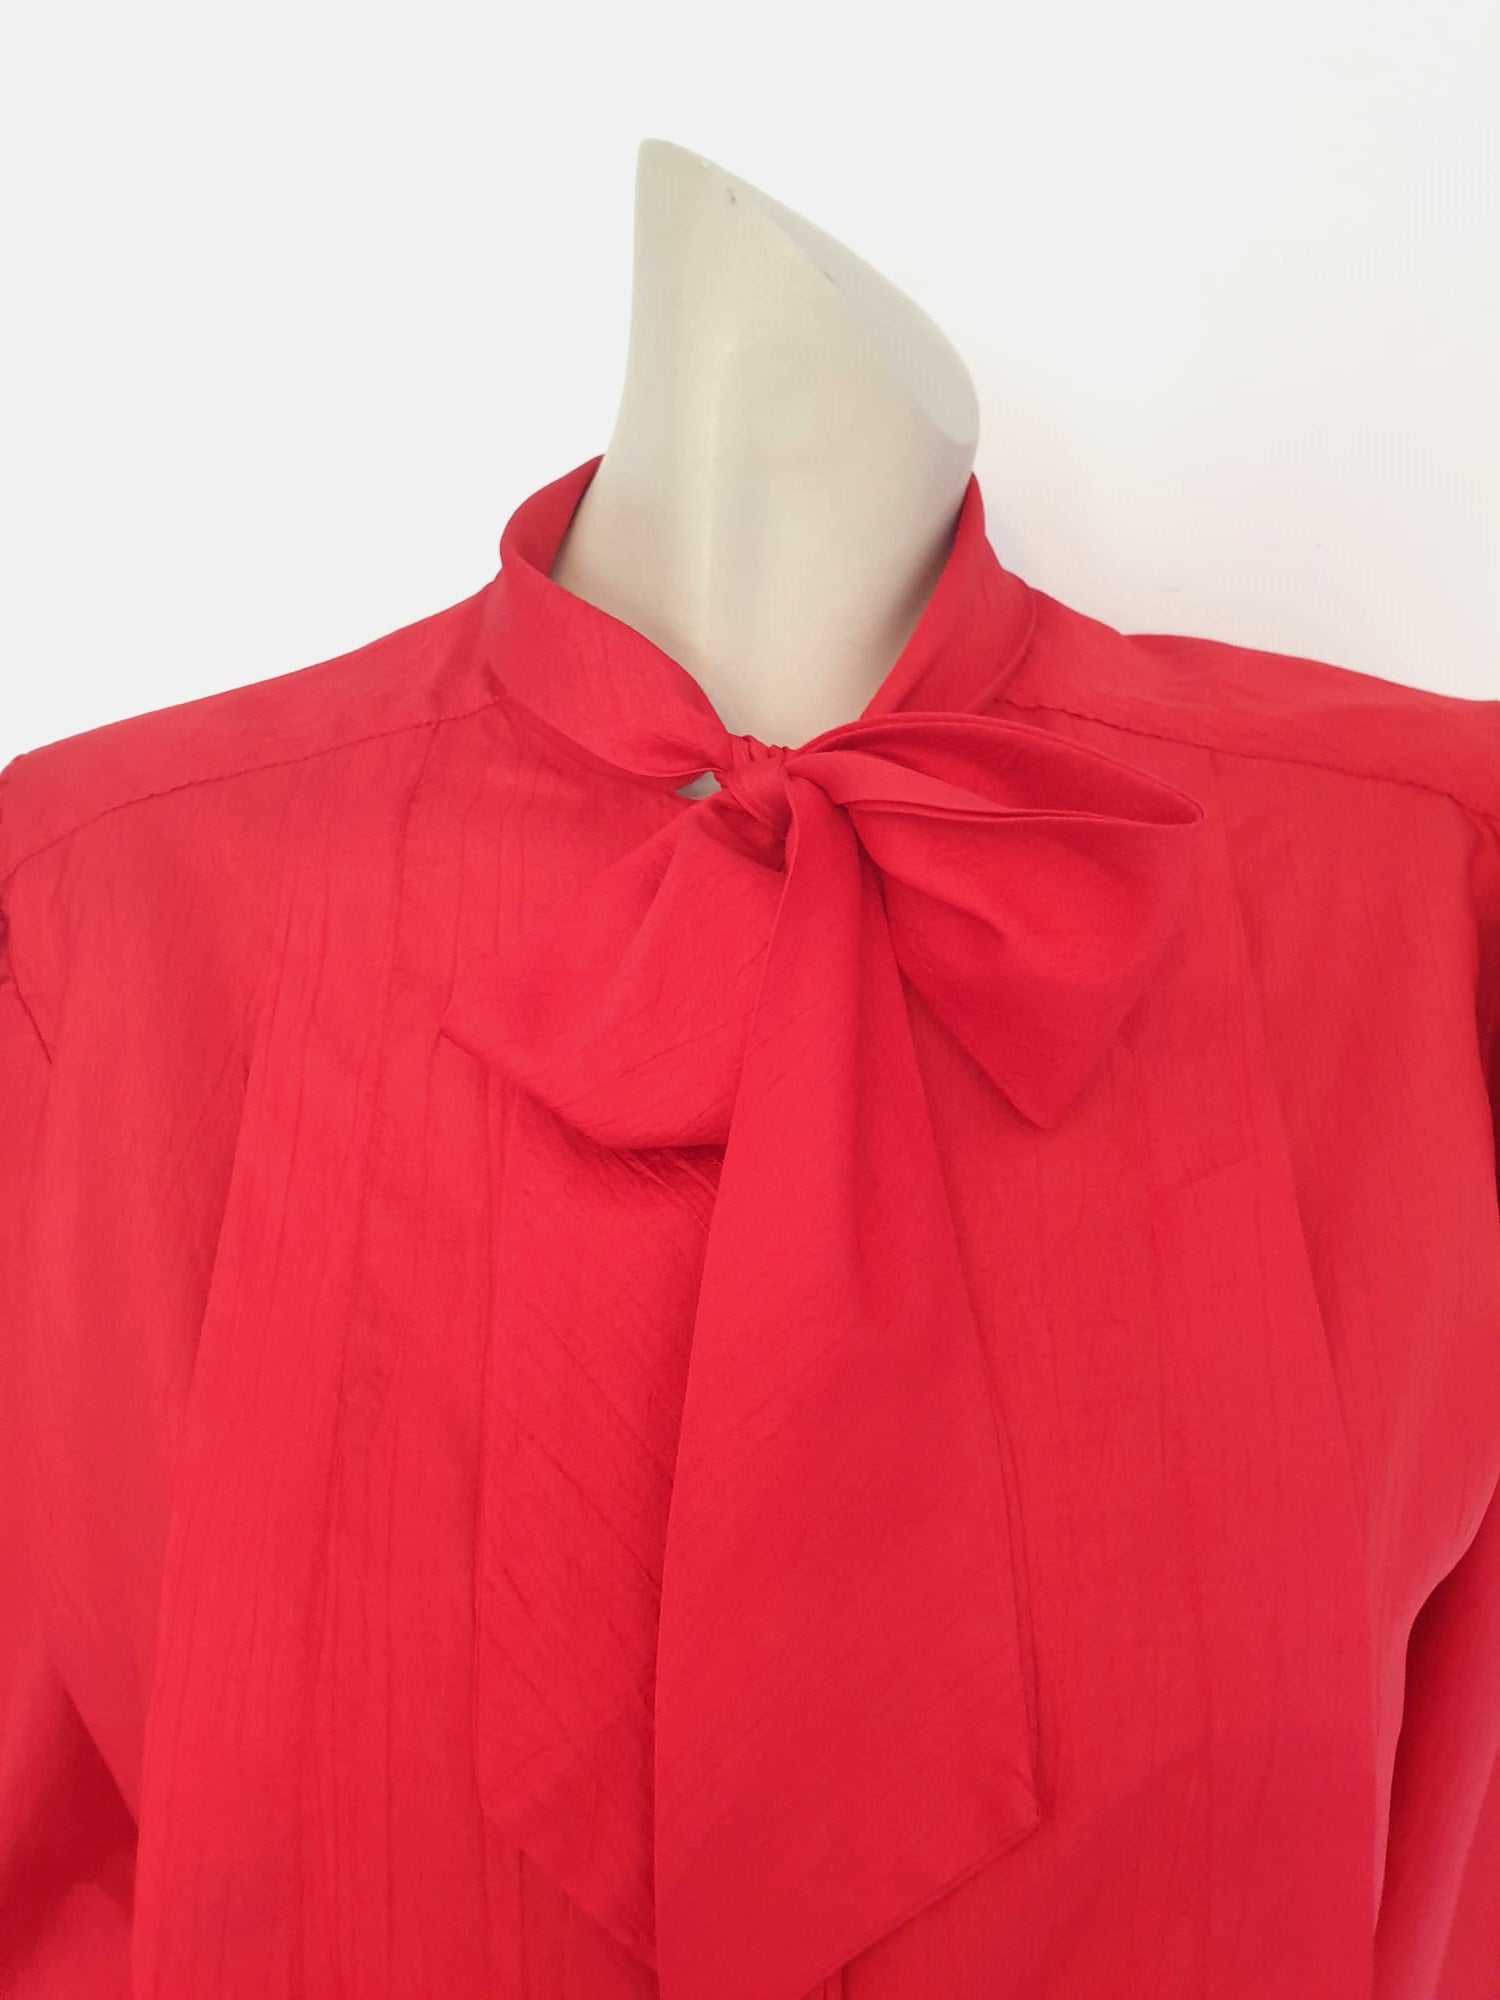 1980s vintage shiny red pussy bow blouse by pelaco large